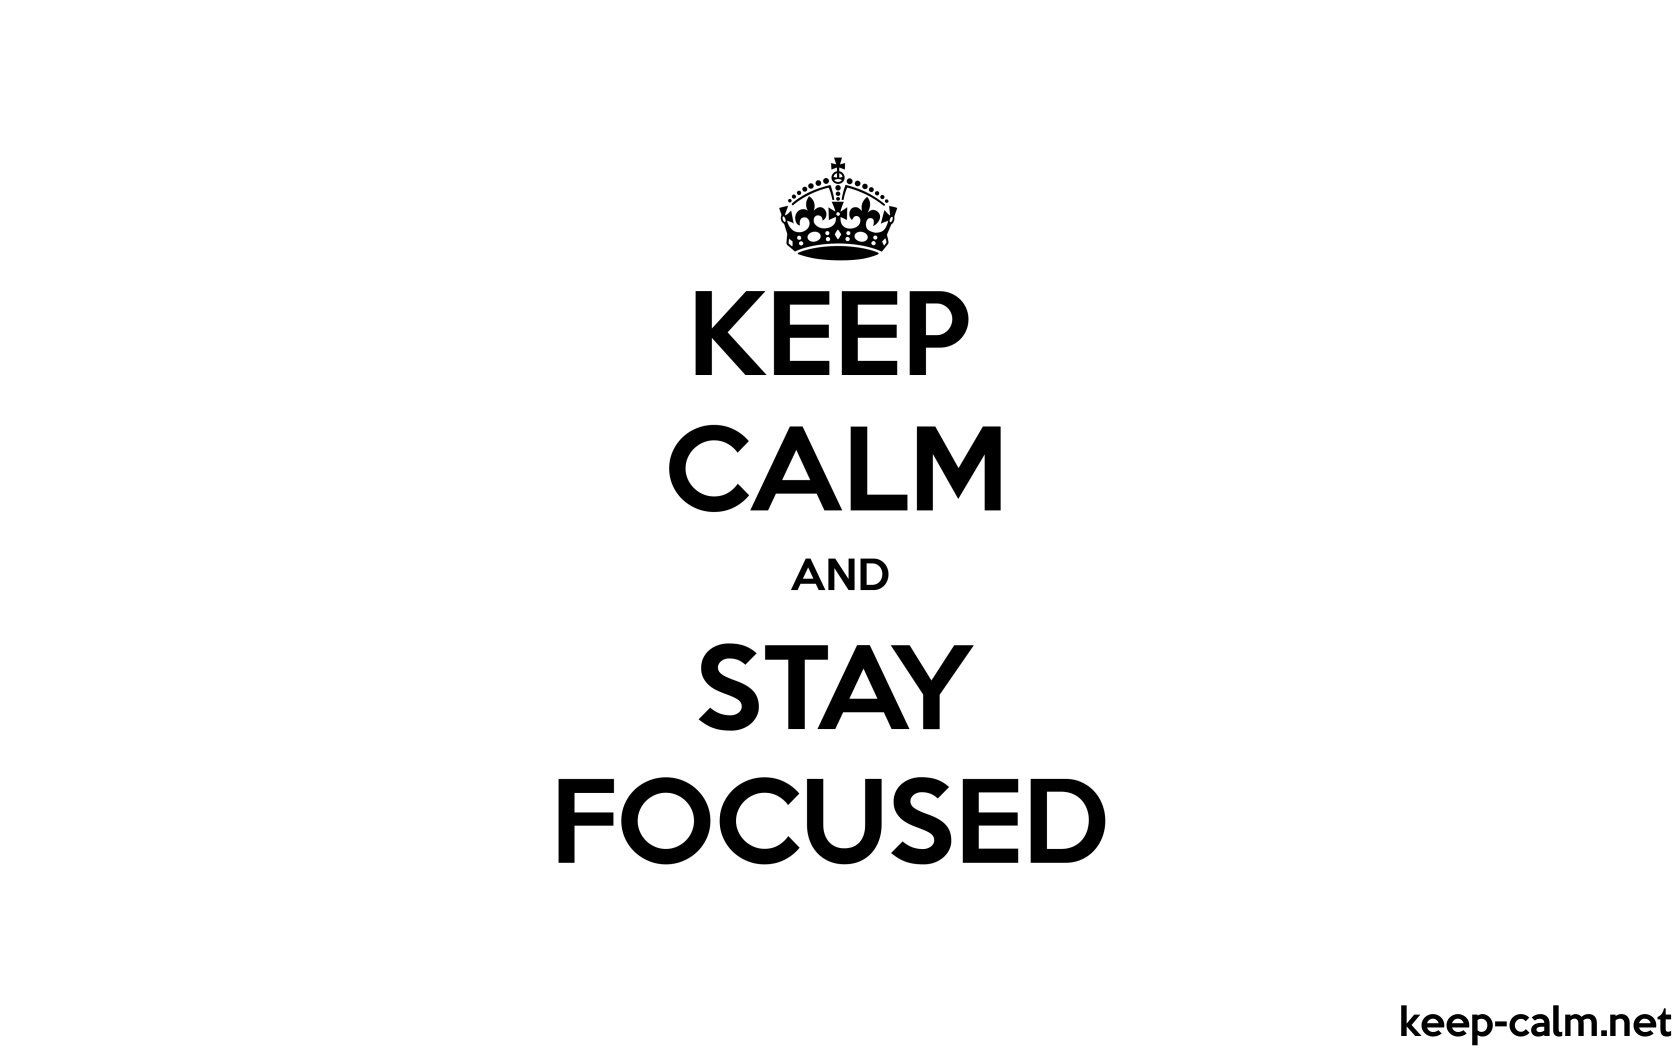 KEEP CALM AND STAY FOCUSED